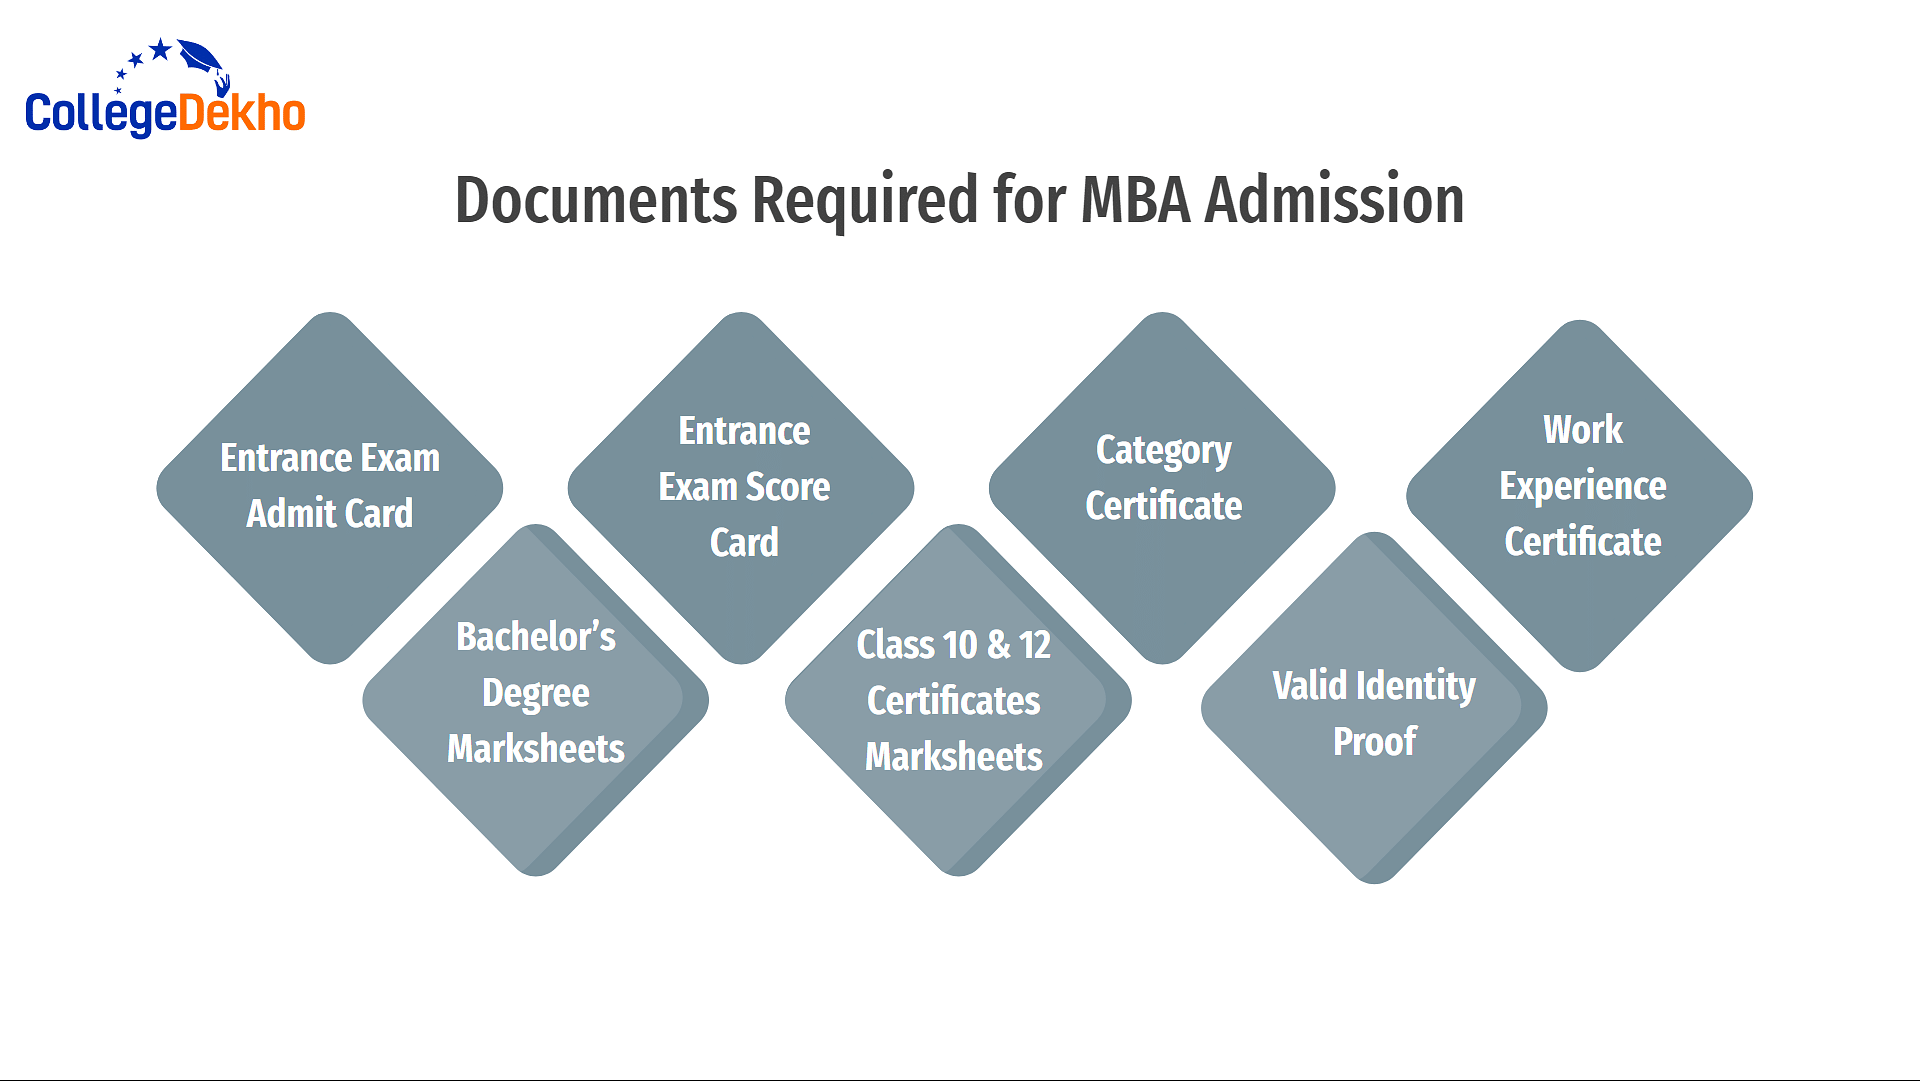 Documents Required for MBA Admission